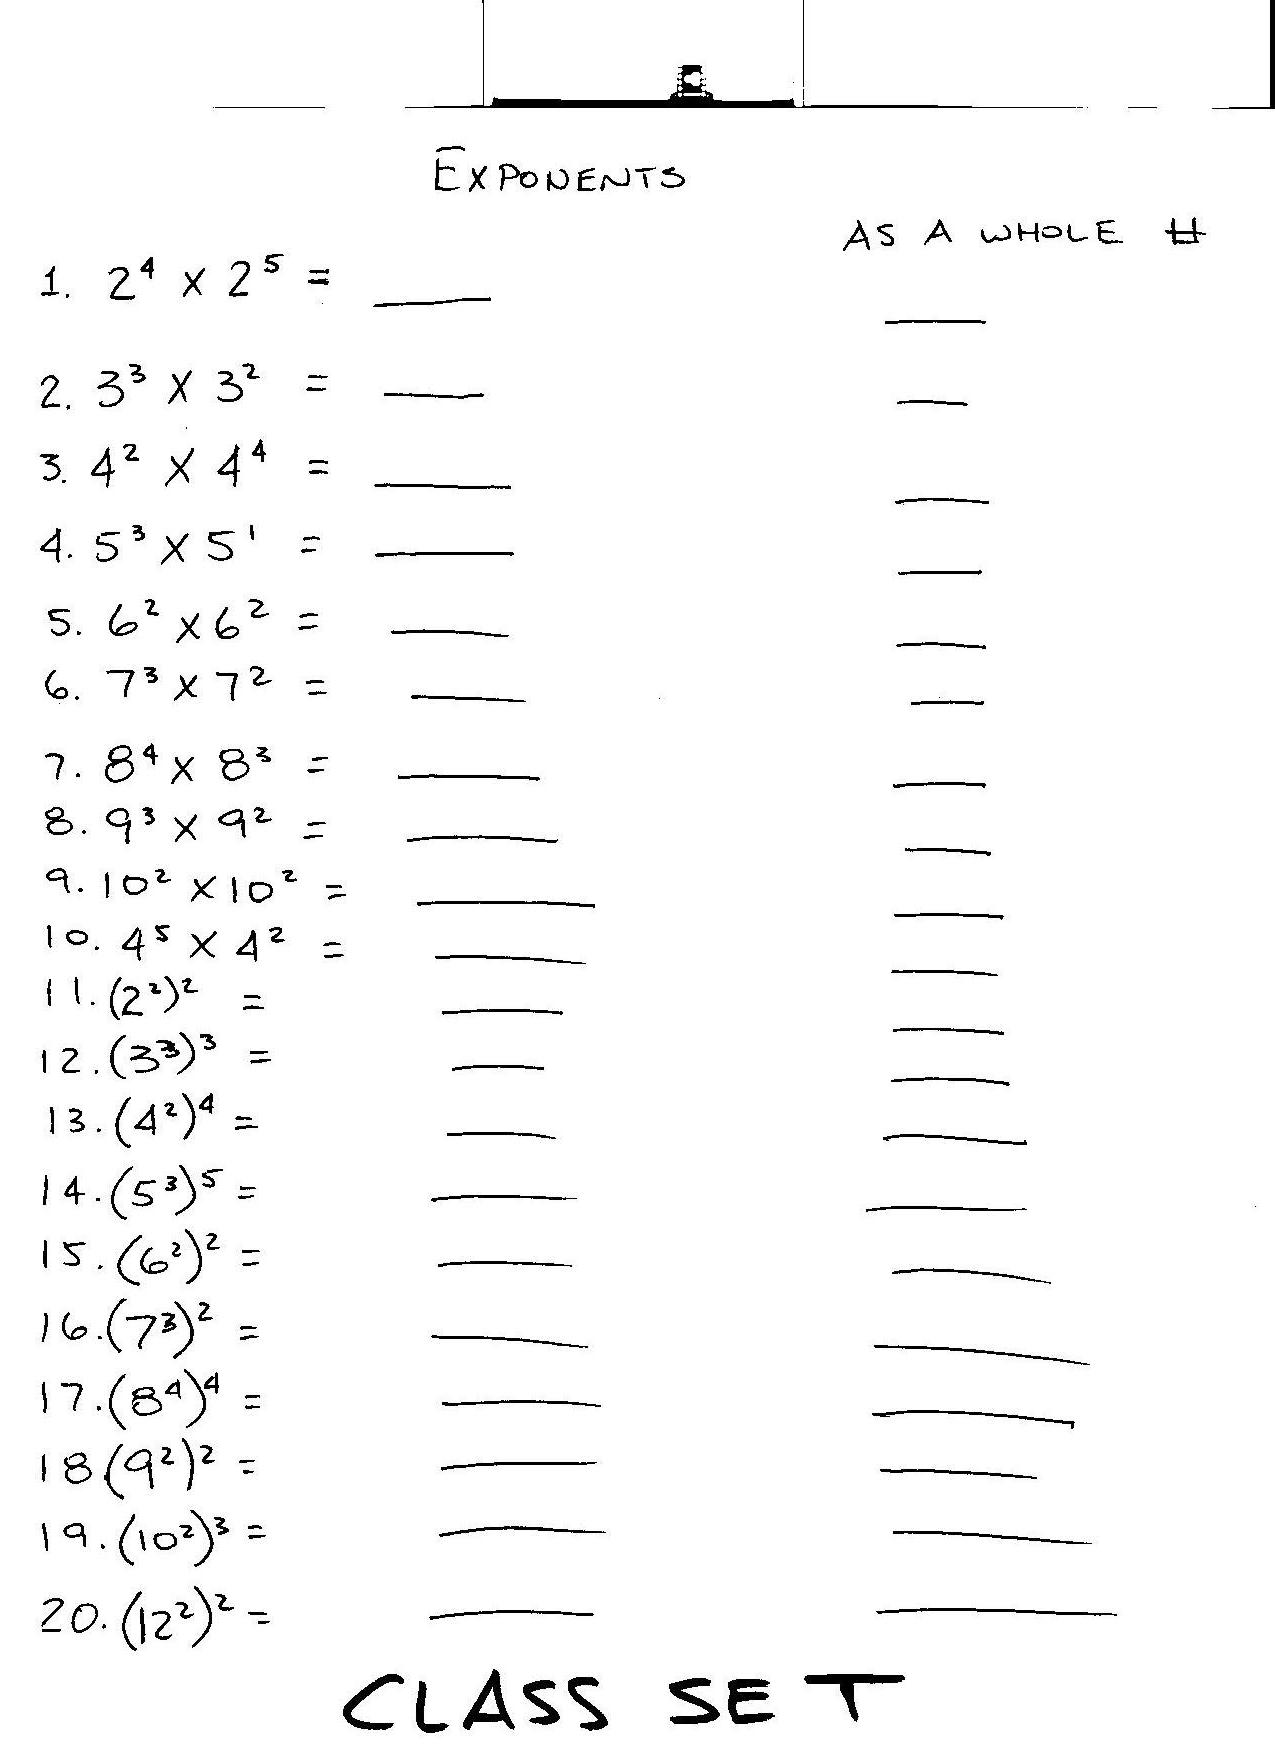 Exponent Worksheets 8th Grade The Best Worksheets Image Collection